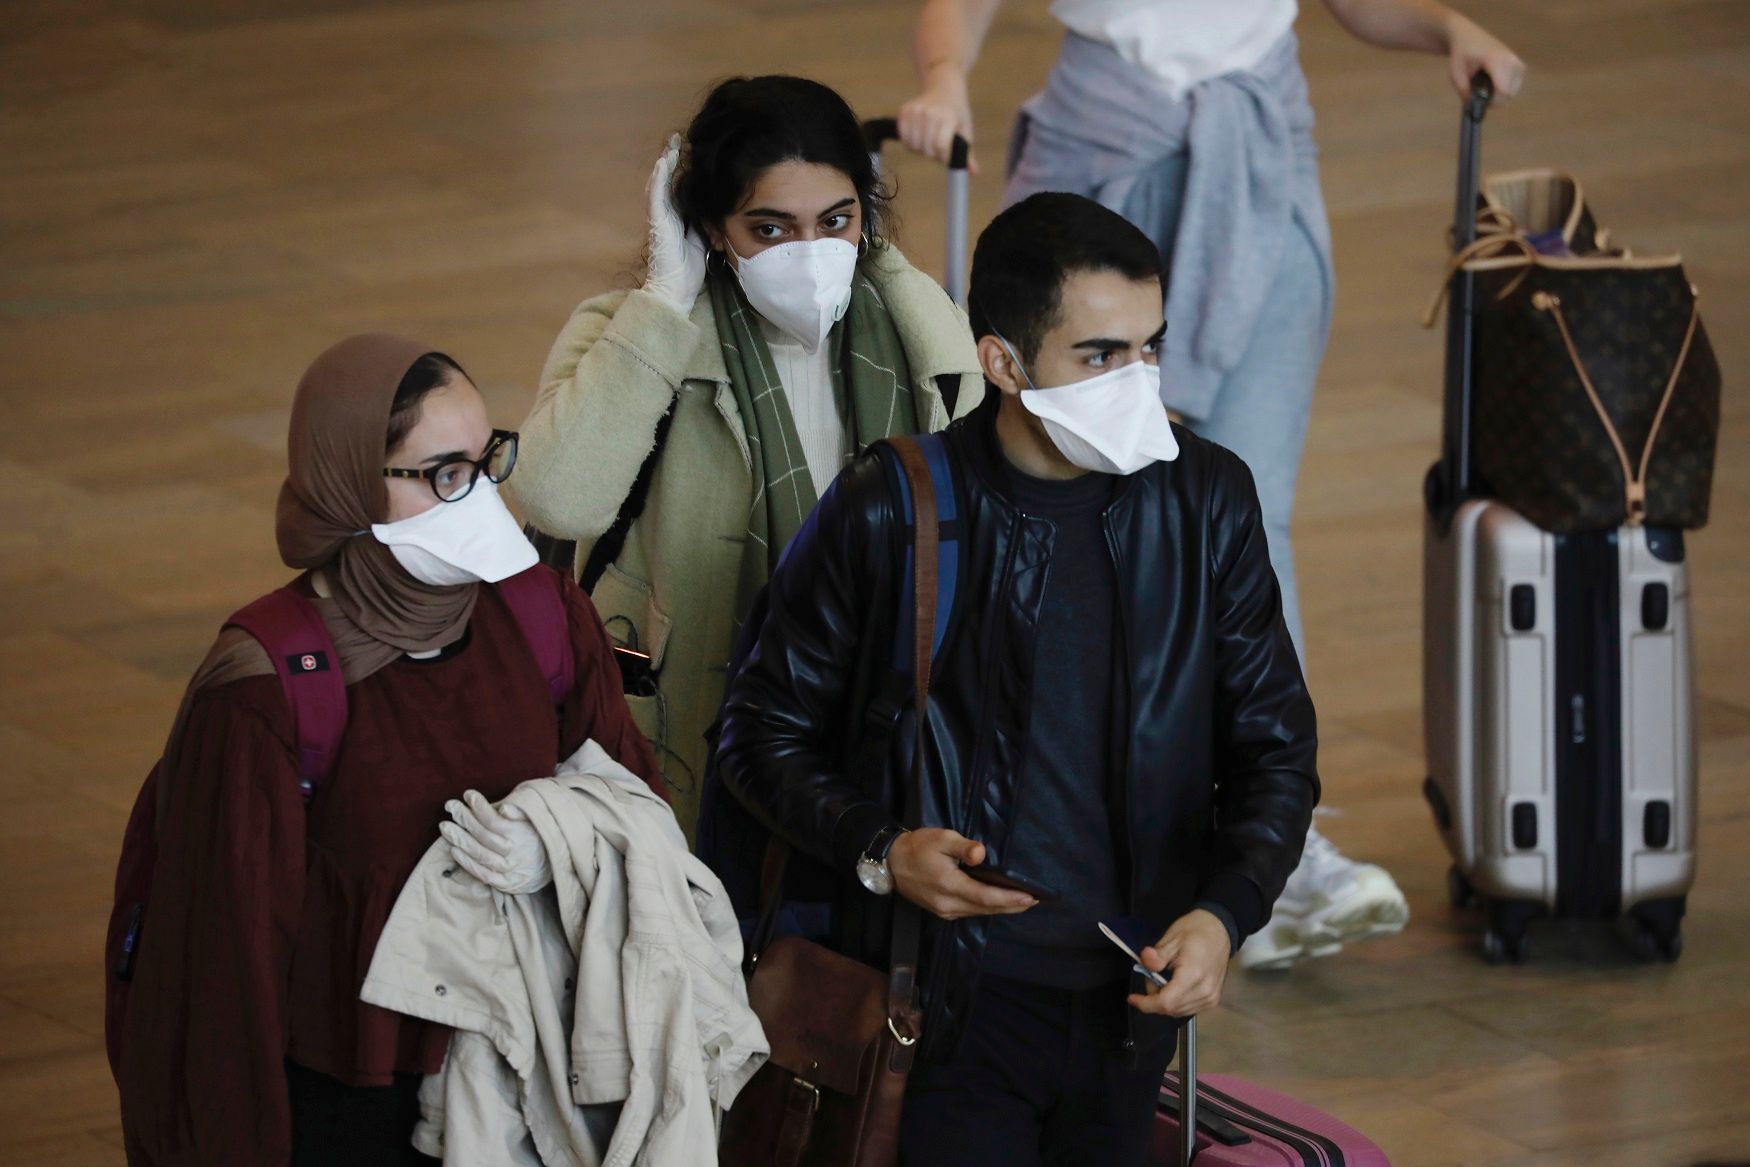 Israel to end mask requirement on international flights – health minister – I24NEWS